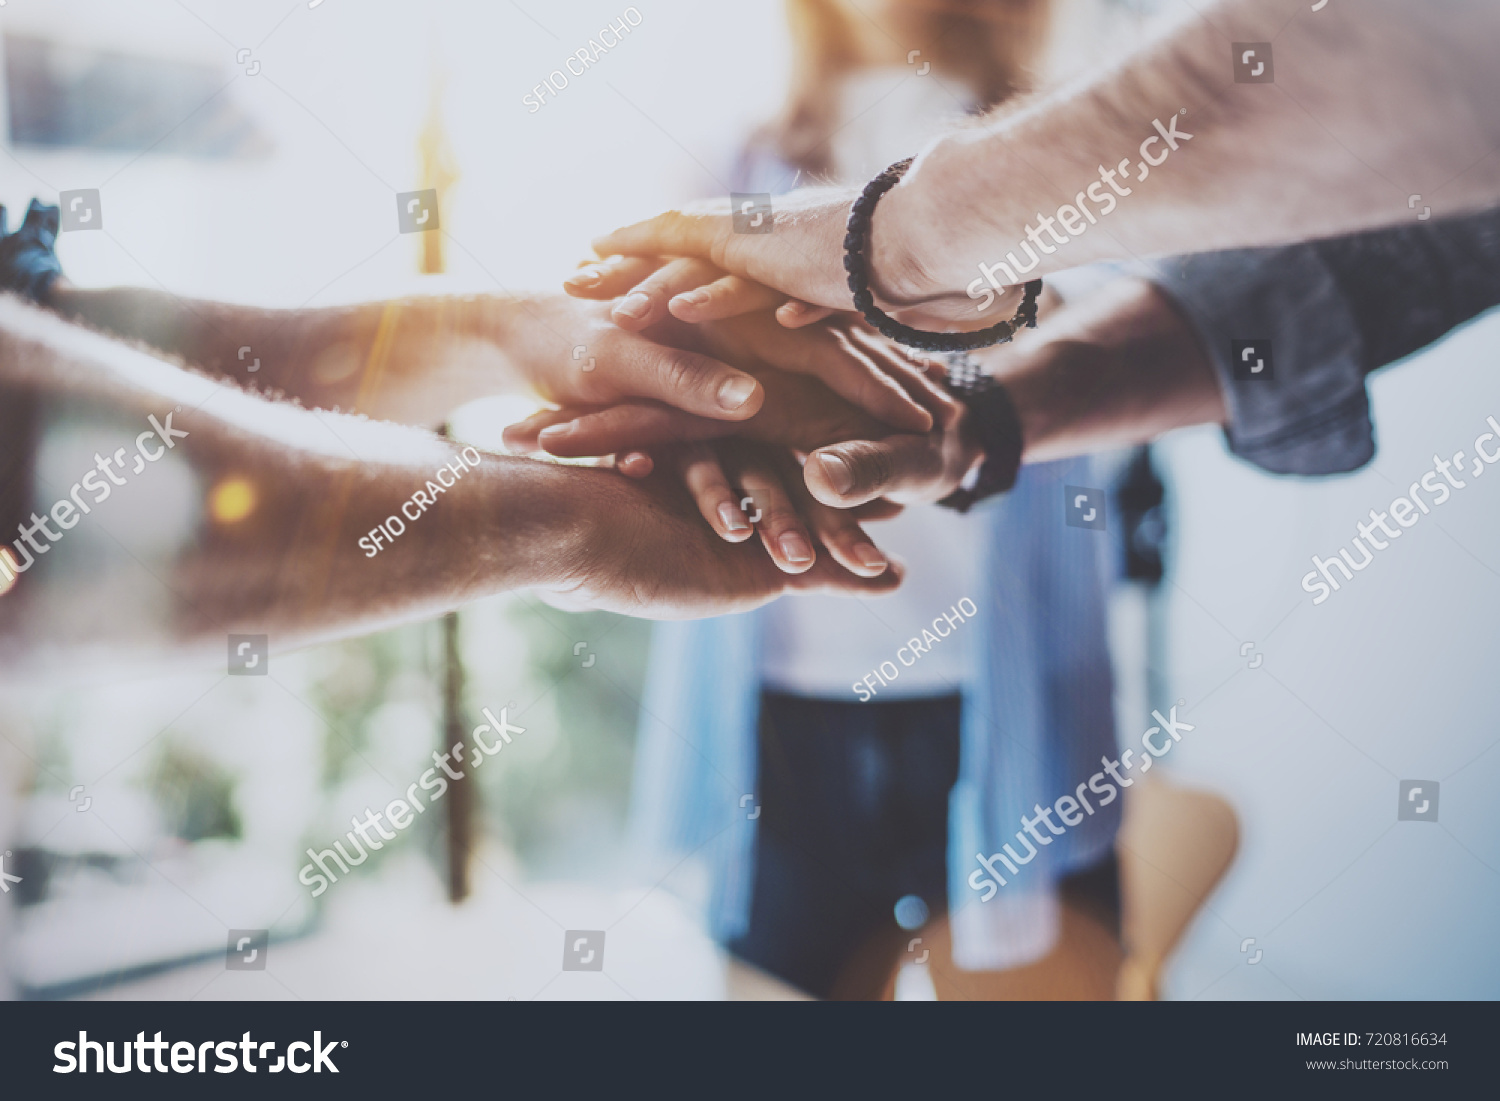 Teamwork business concept.Close up view of group of three coworkers join hand together during their meeting. Horizontal.Blurred background #720816634